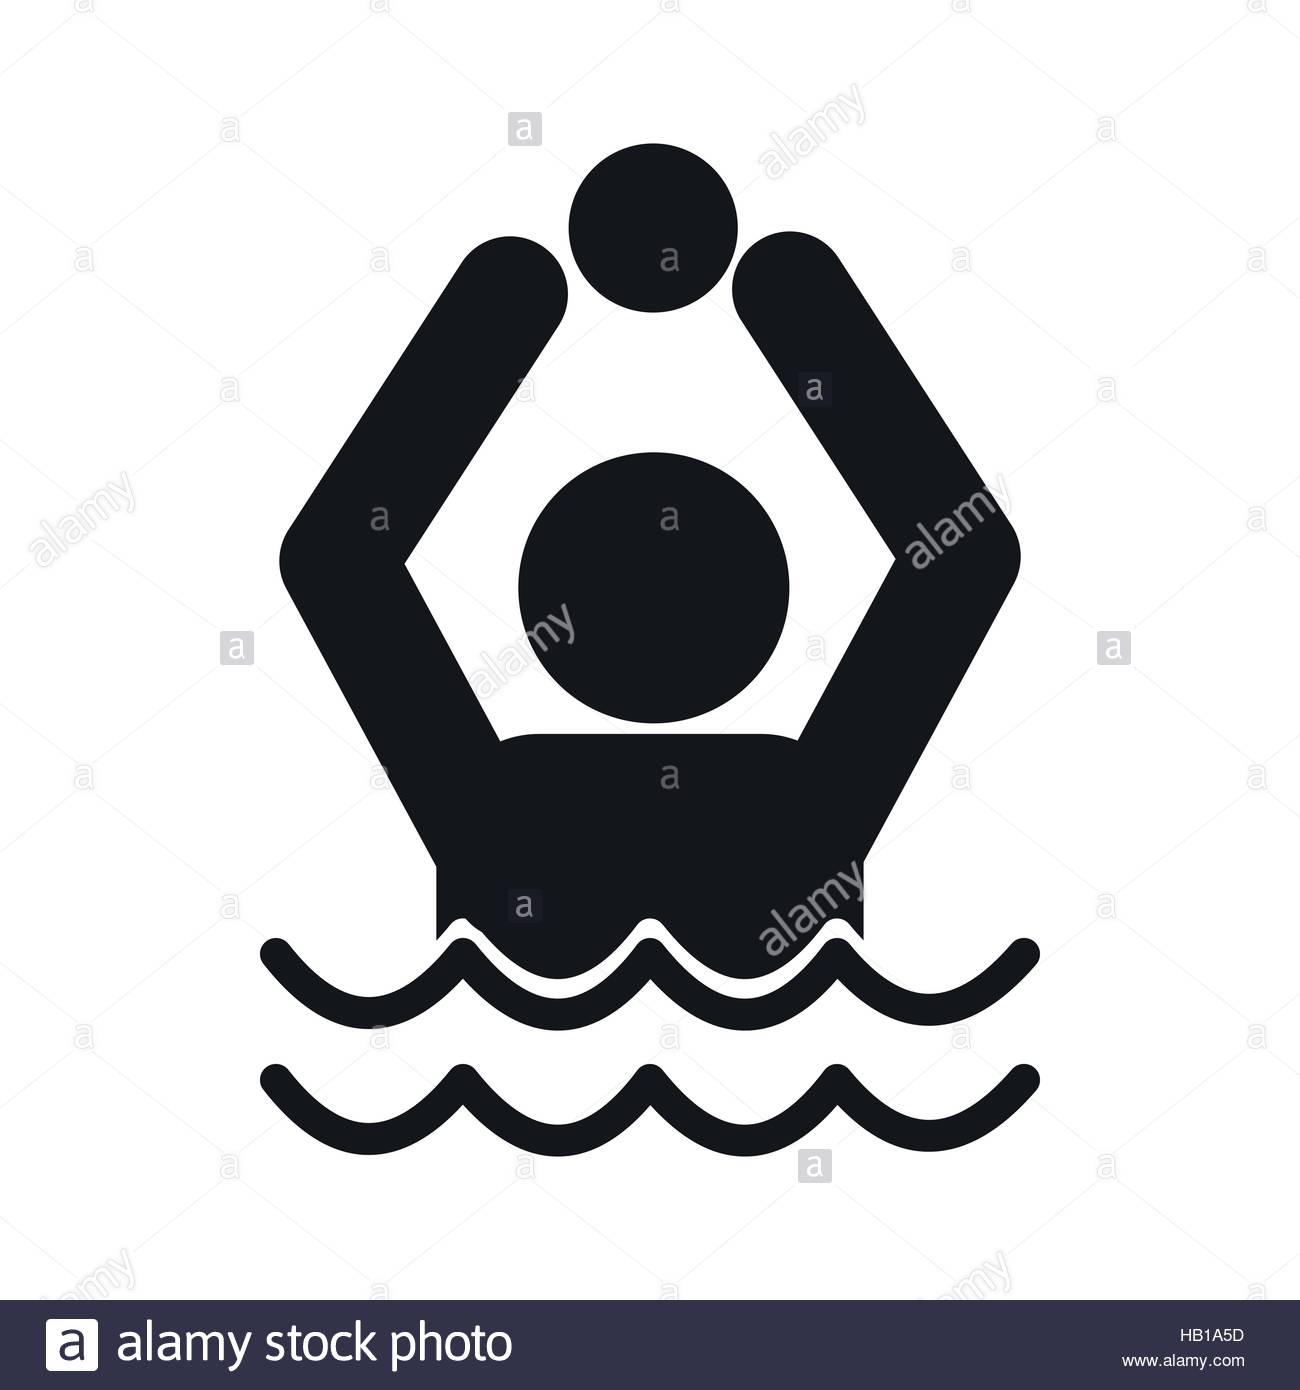 Water-polo icons | Noun Project